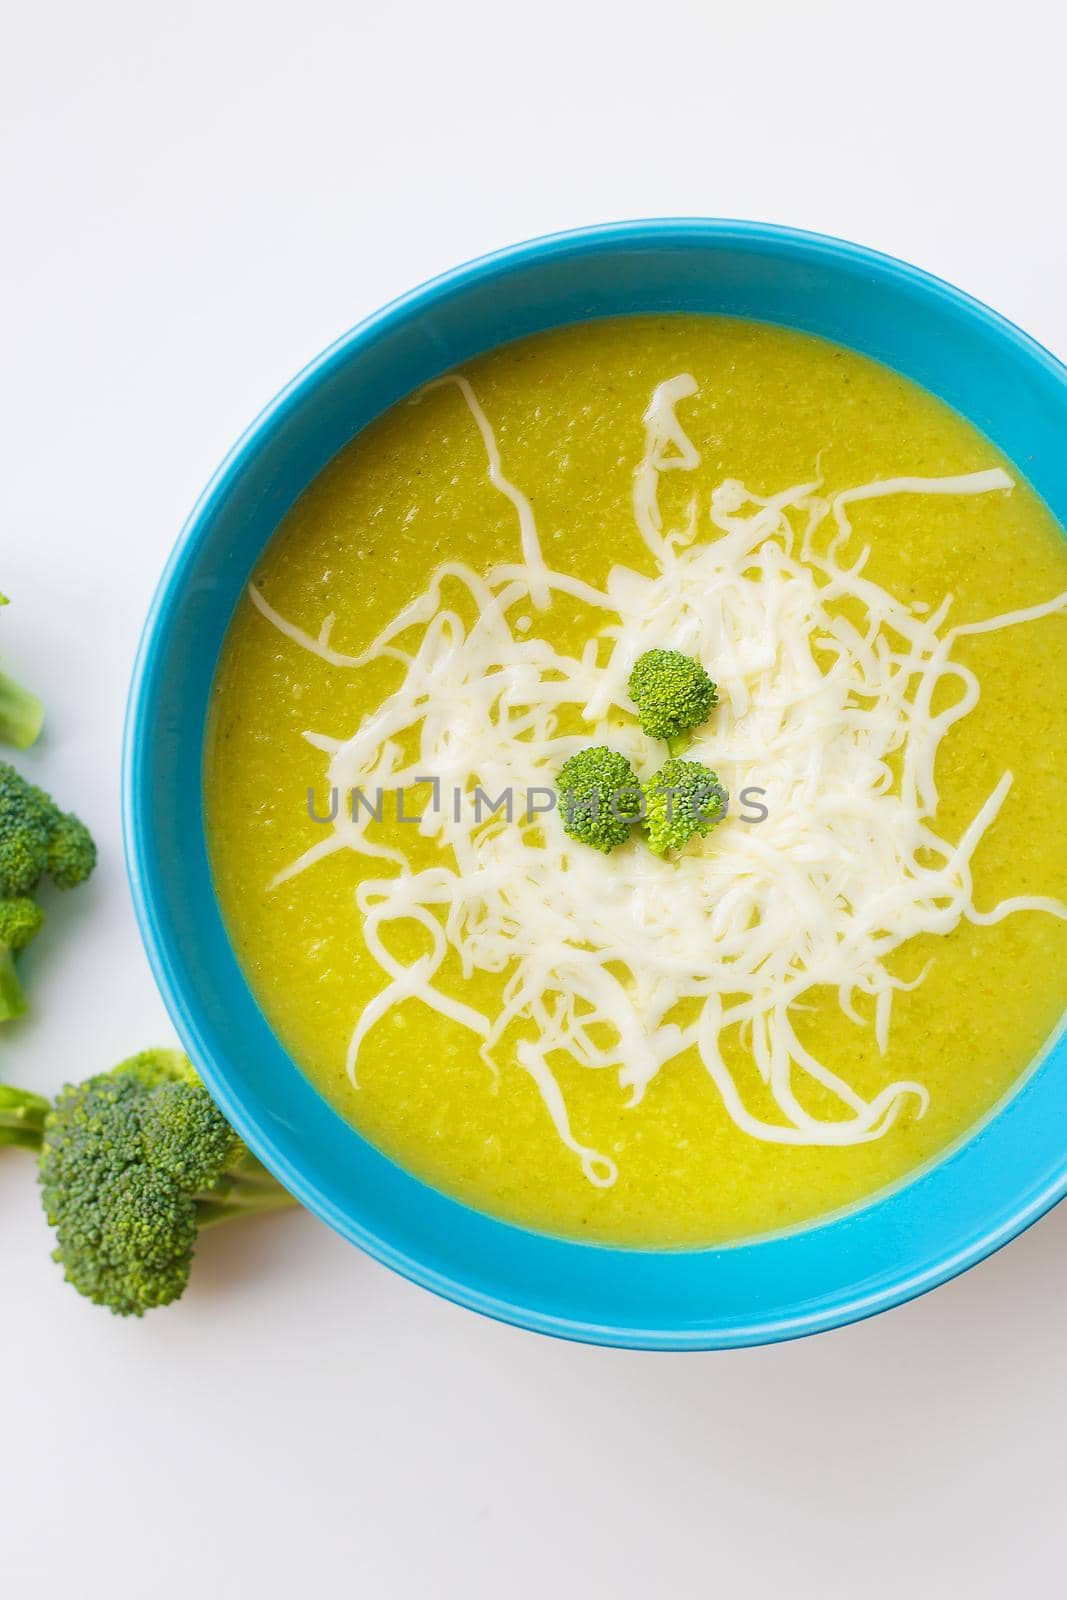 Fresh Cream of broccoli soup in the blue plate, close-up